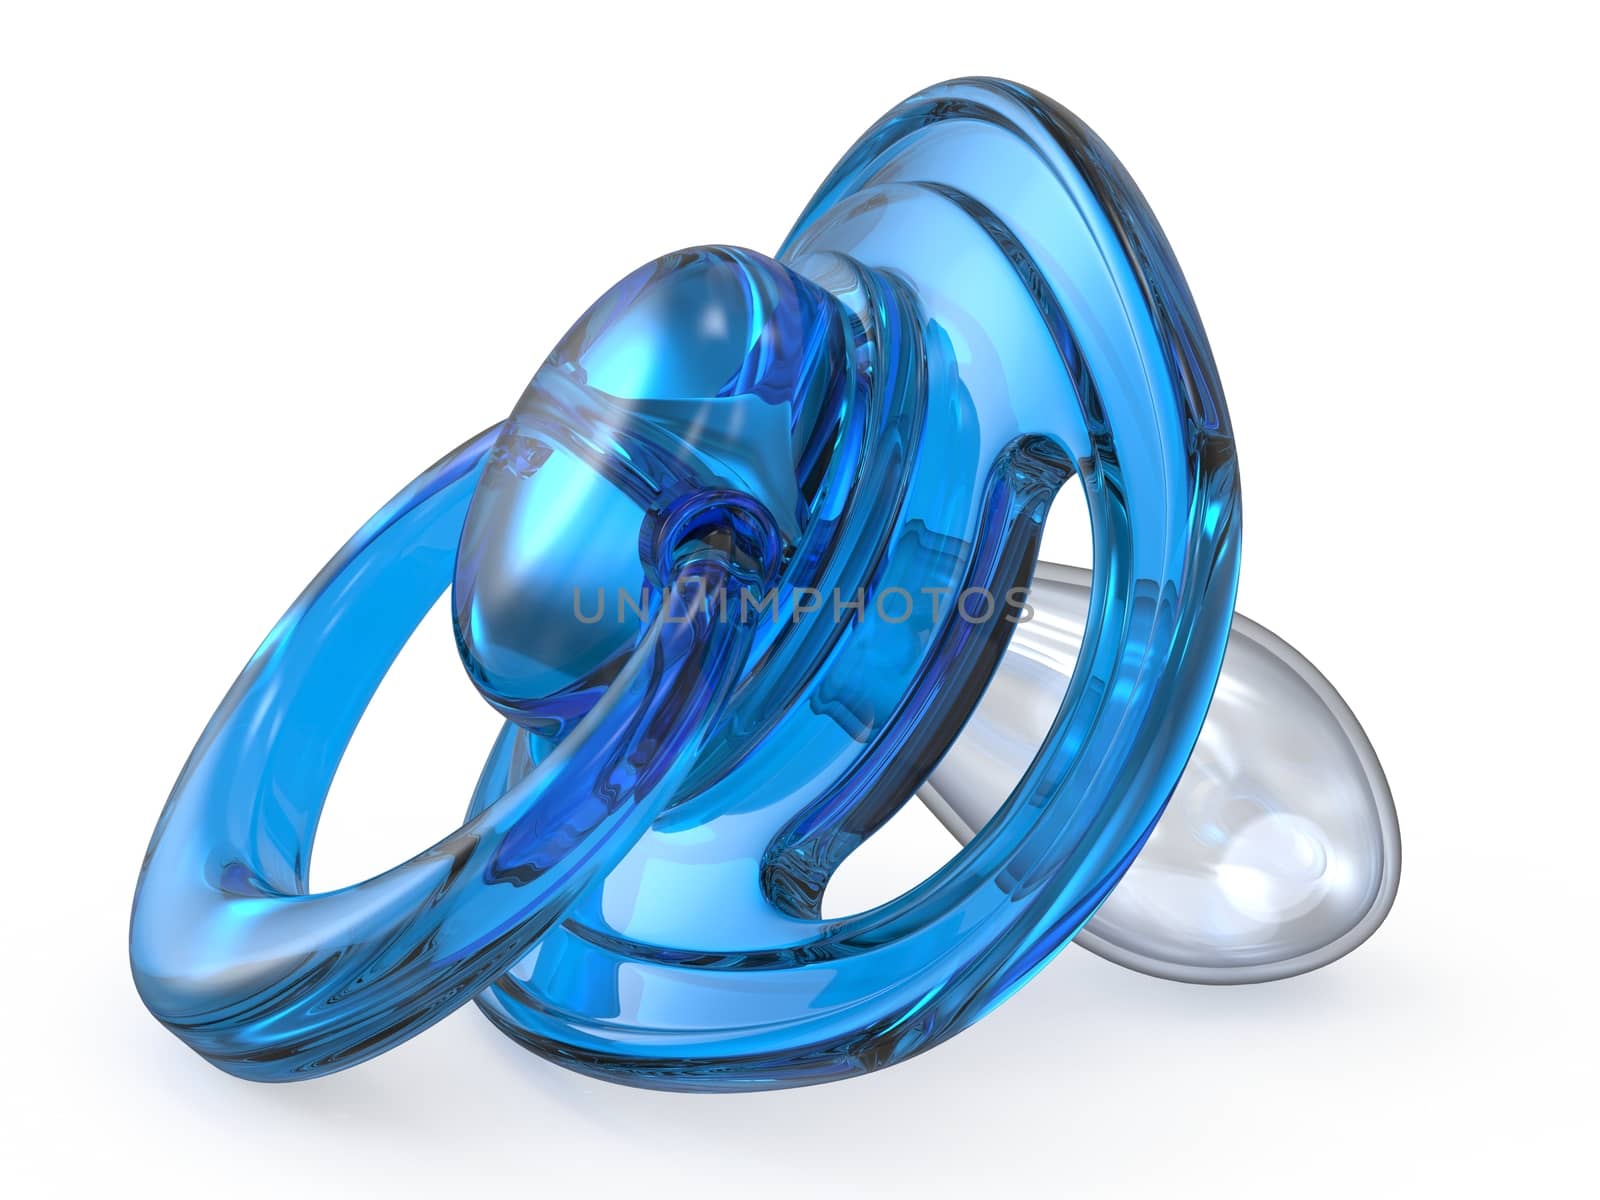 Blue baby pacifier side view 3D render illustration isolated on white background